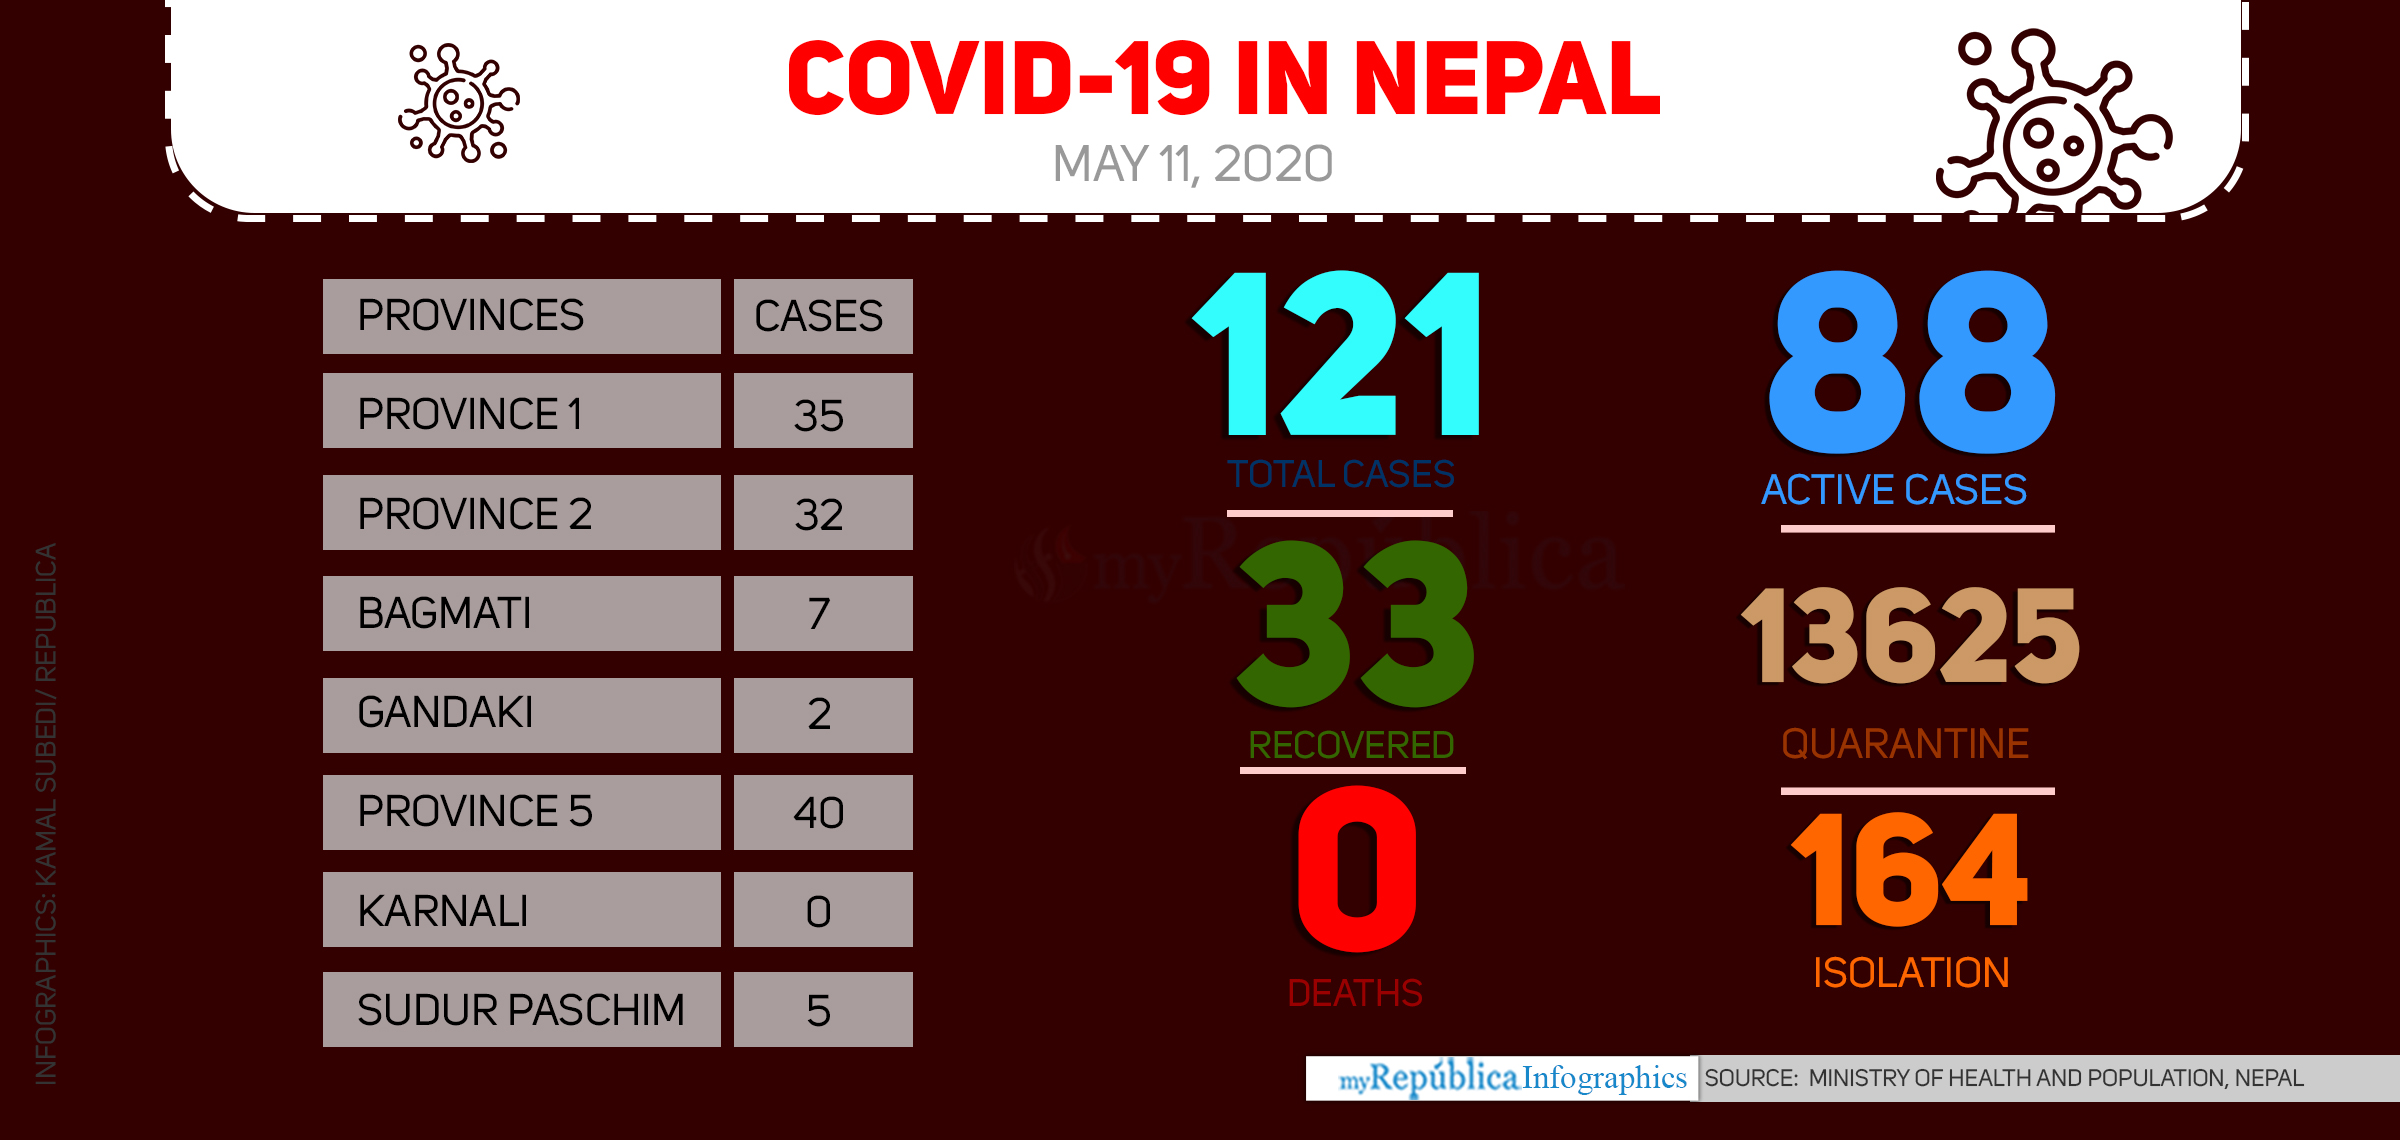 Nepal’s COVID-19 tally jumps to 121 as one more tests positive in Saptari